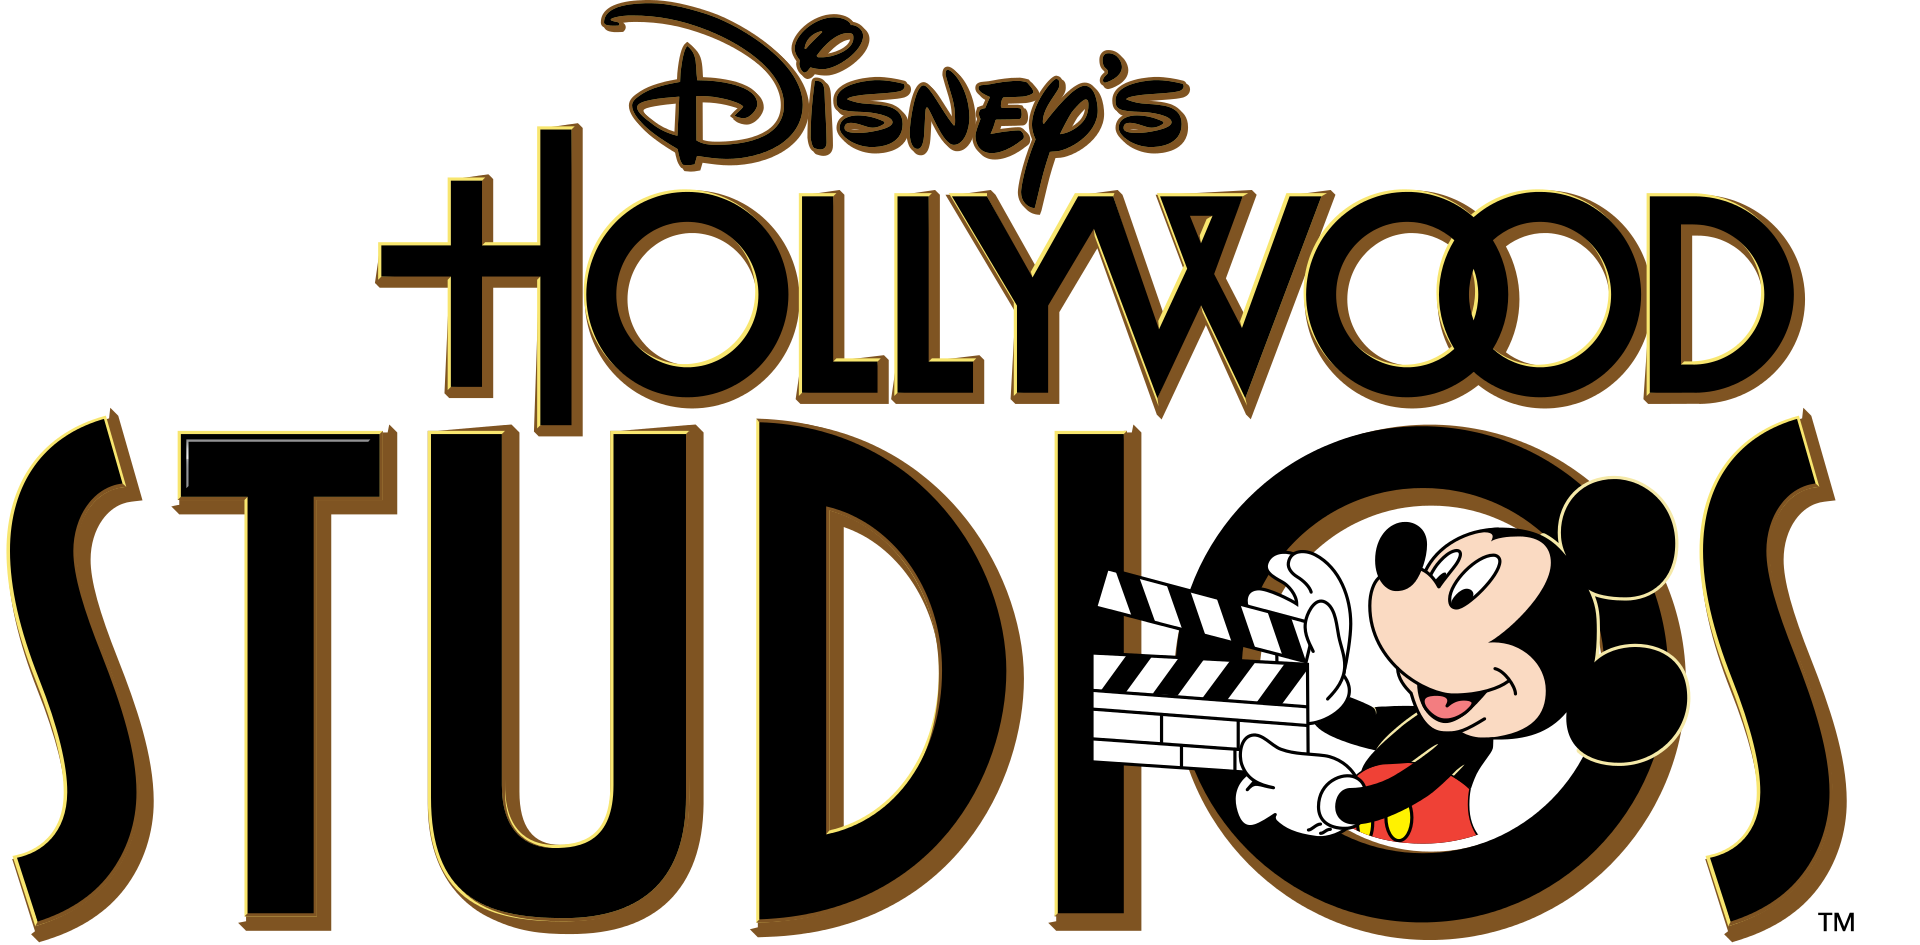 Disney's Hollywood Studios has a new logo - and we're wholly uninspired